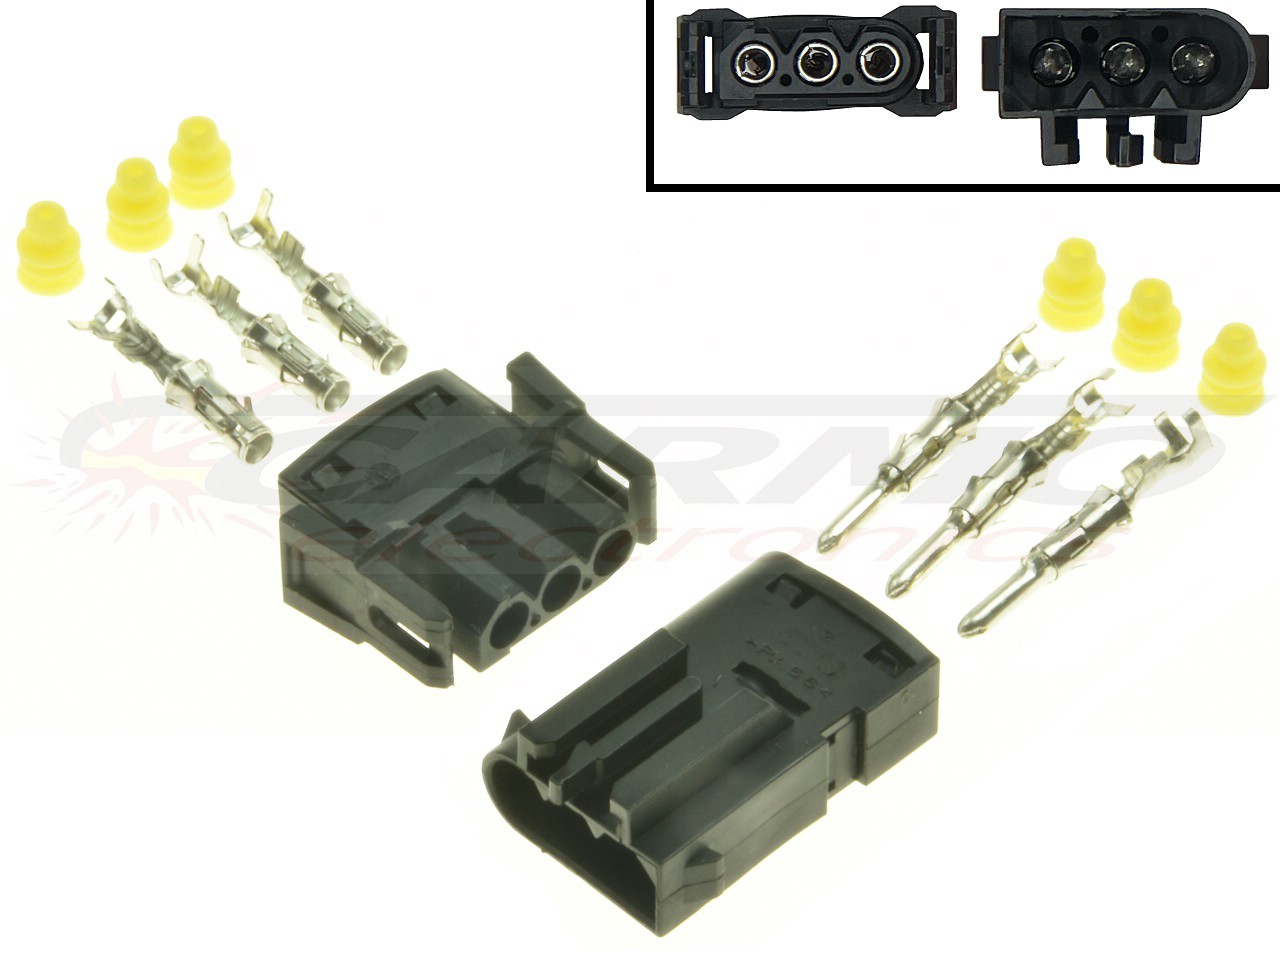 BMW C400 F650 F700 F800 voltage regulator rectifier connector set (AMP 1-828817-1, BMW 1378114, PA66) - Click Image to Close